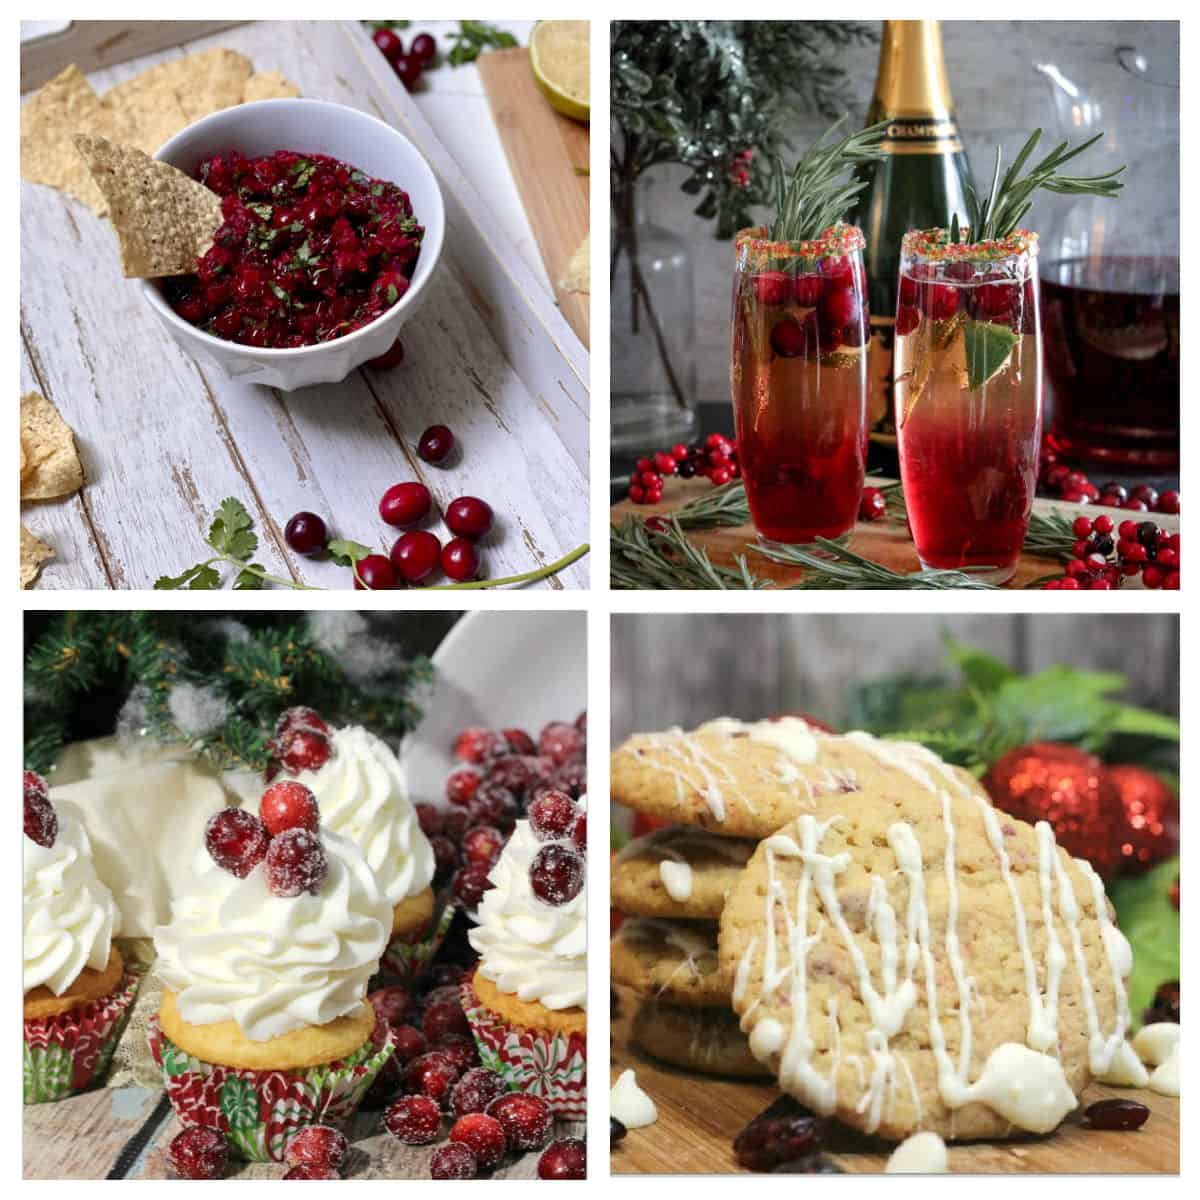 10 Amazing Cranberry Recipes for the Holidays